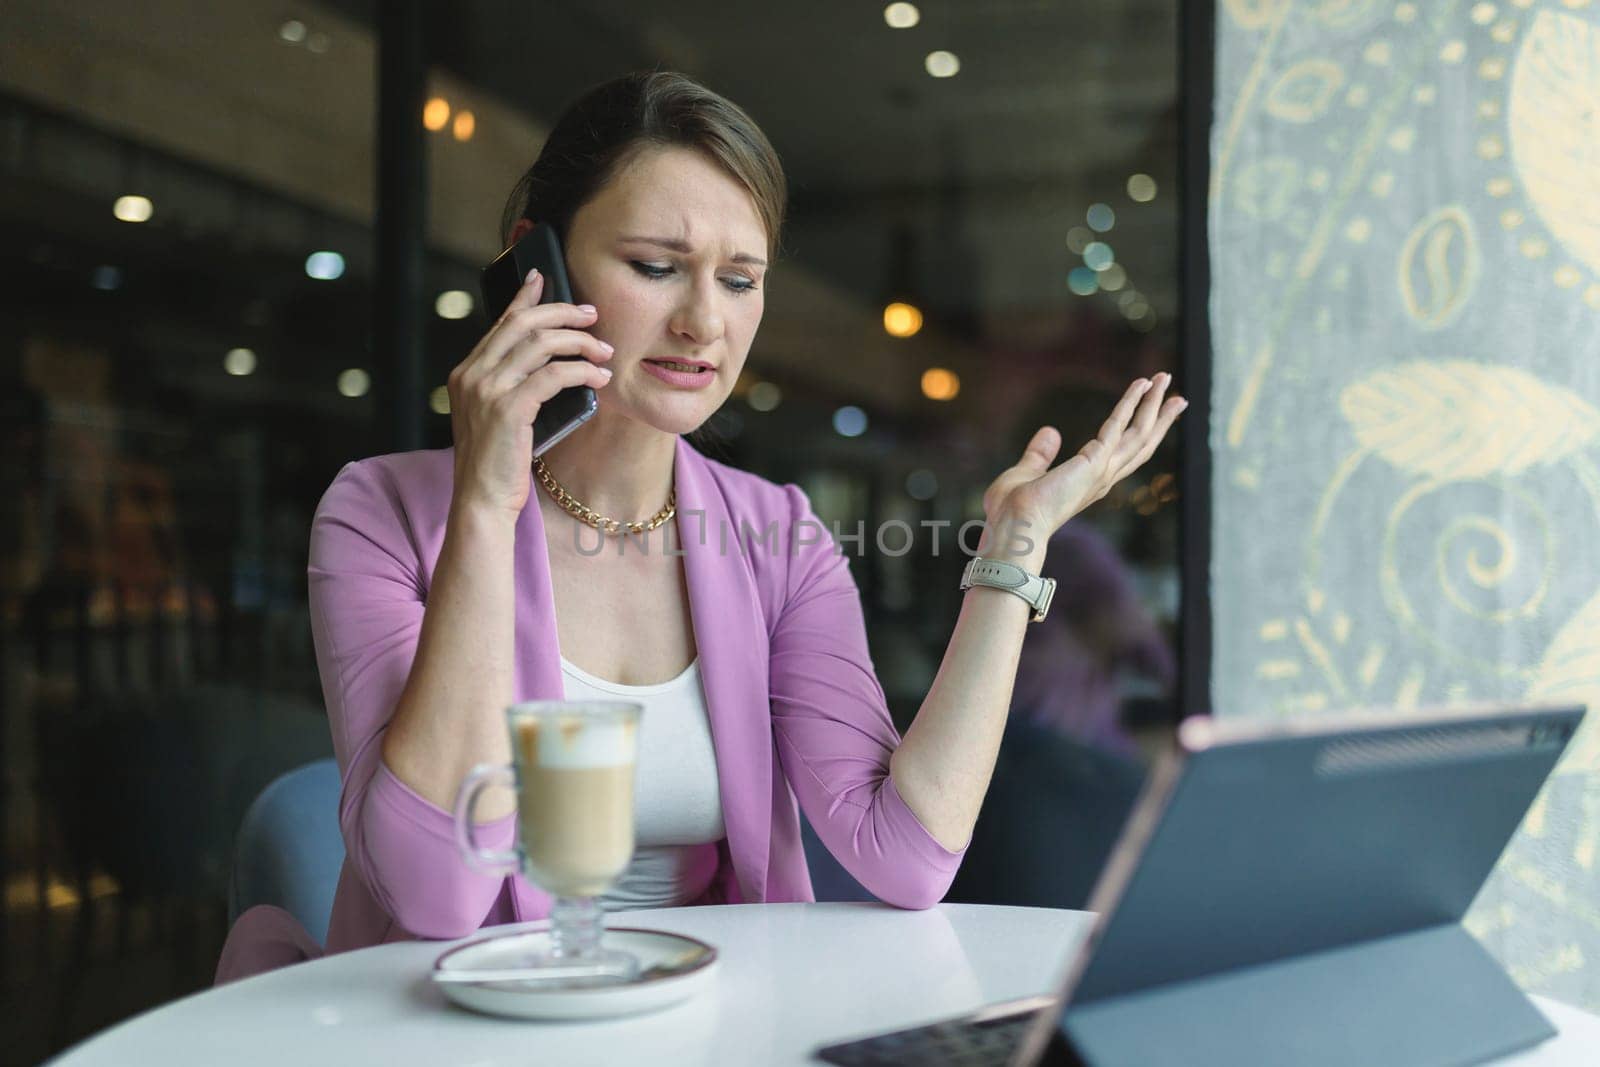 When business doesn't go according to plan. Upset business woman emotionally talking on the phone in a cafe by Rom4ek